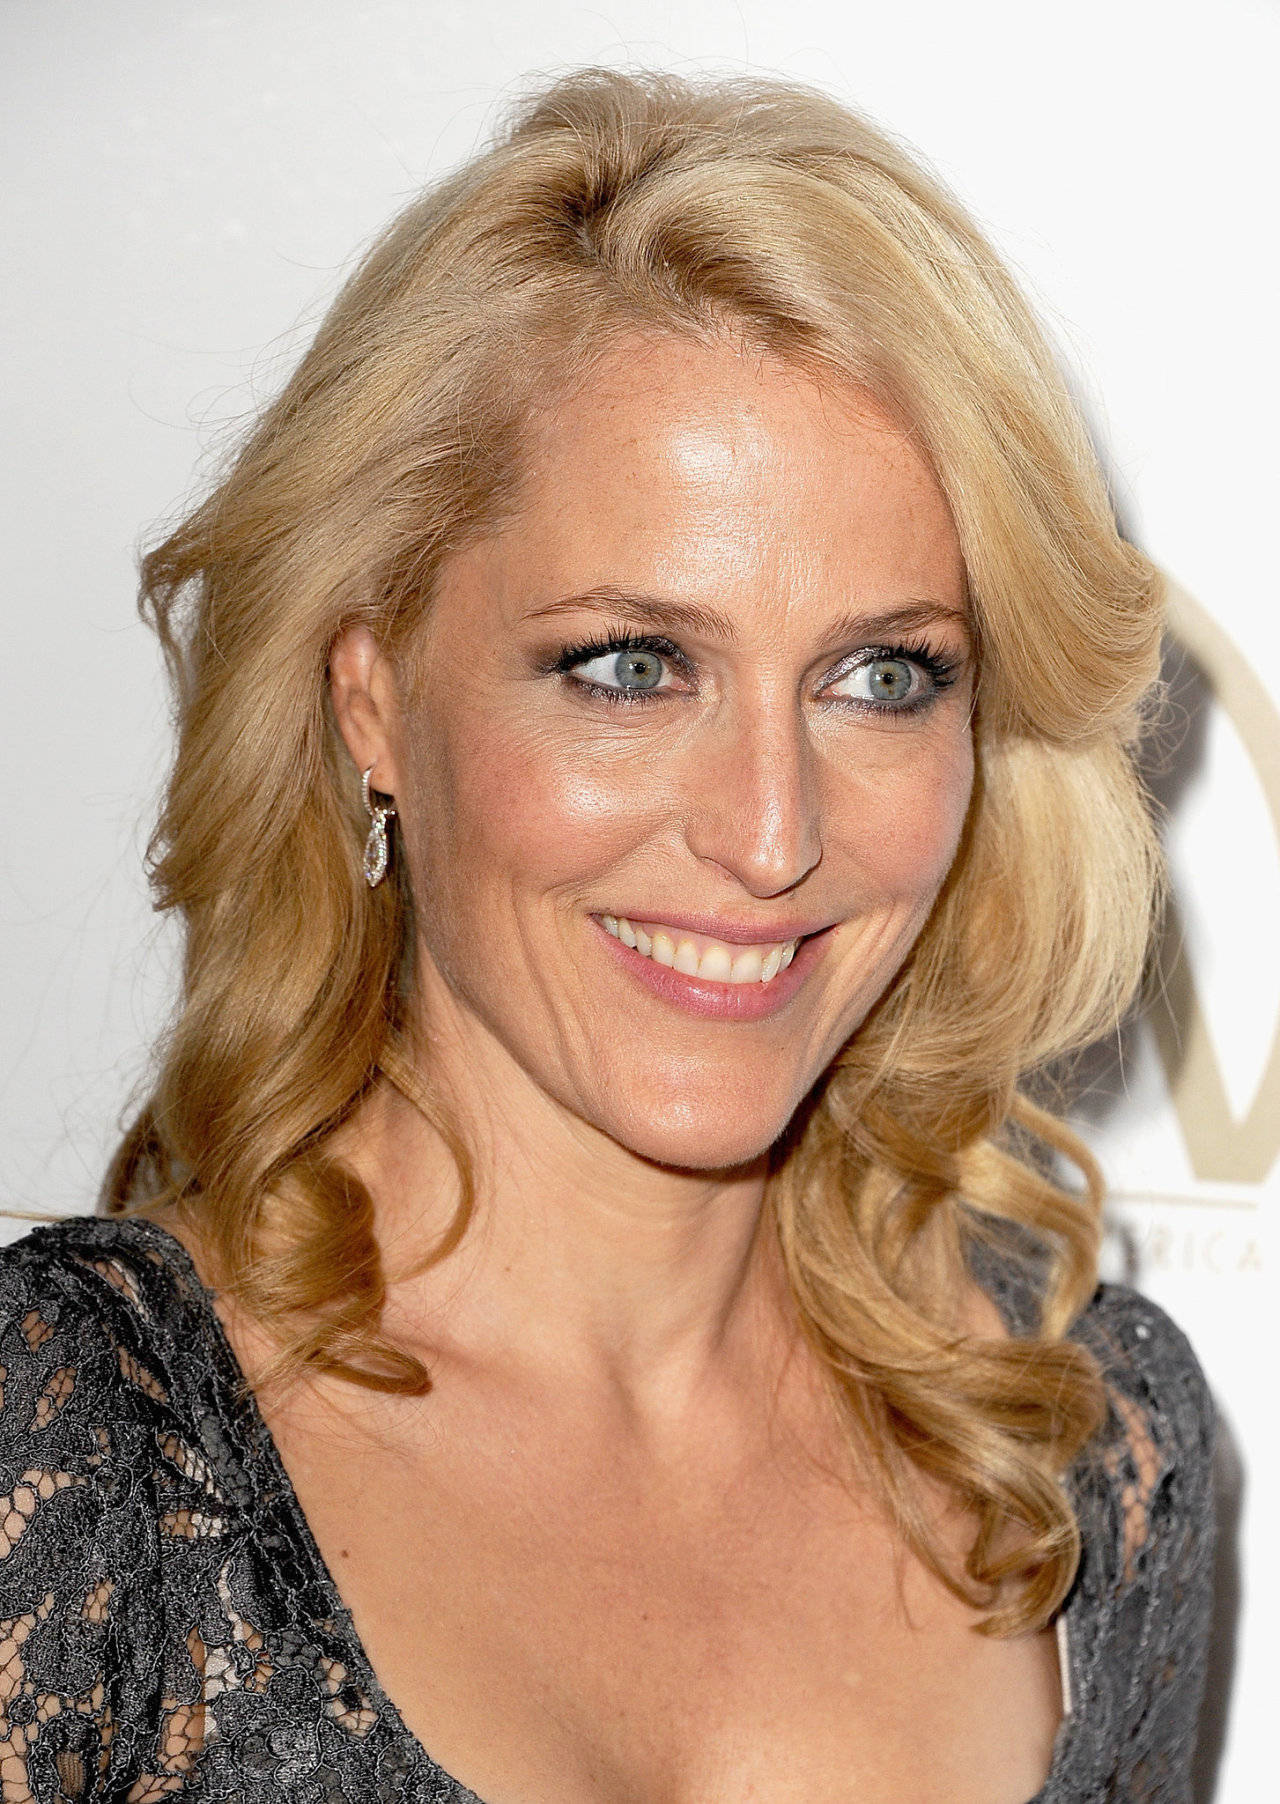 Caption: Gillian Anderson Showcasing A Curly Blonde Hairstyle.